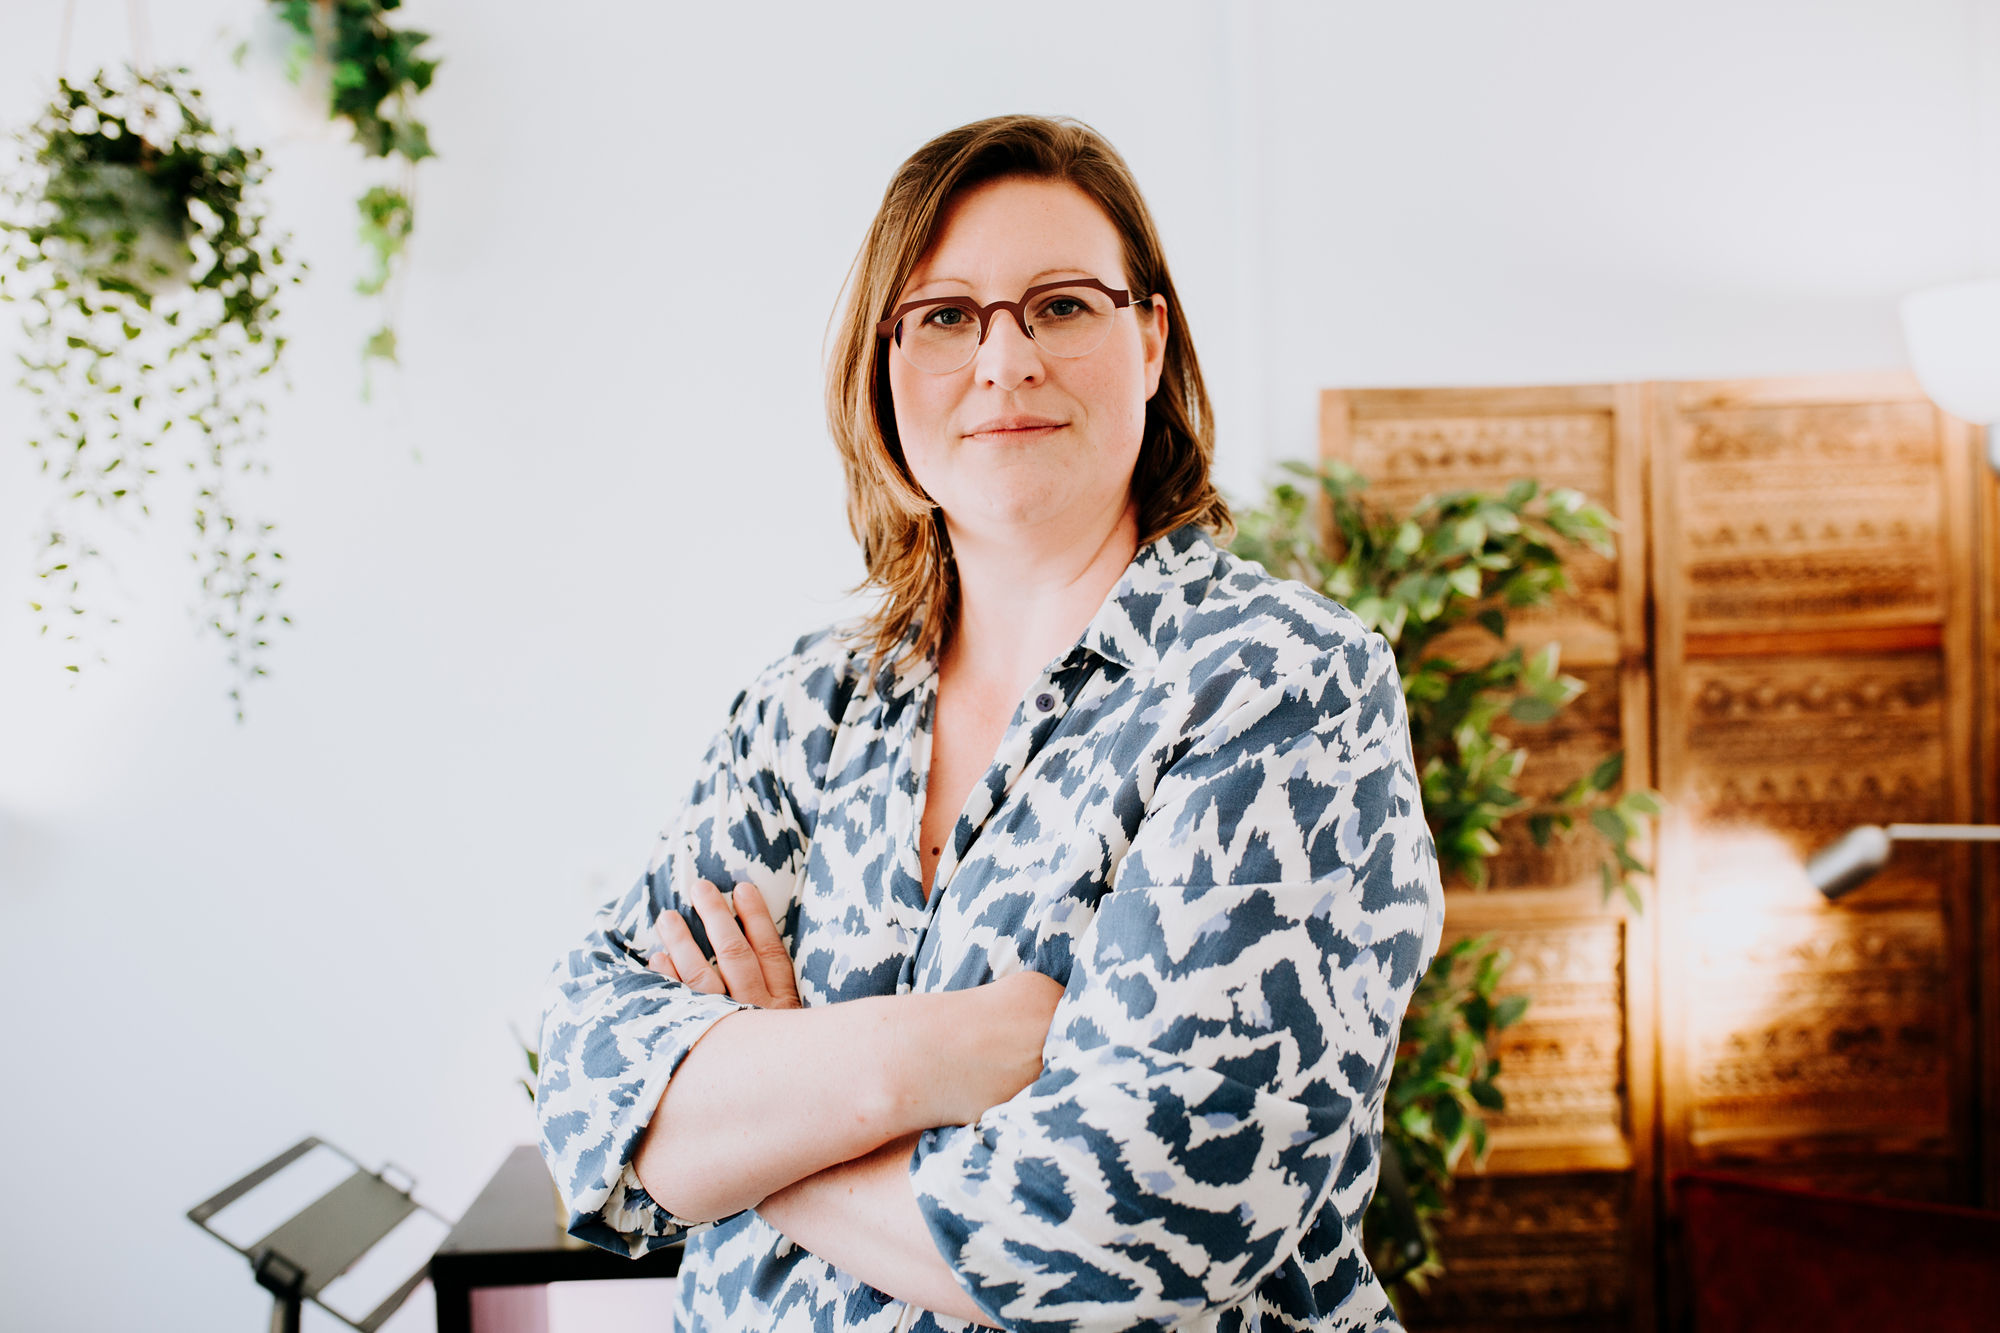 Executive communication coach Ellen Bracquine looking straight at the camera with her arms crossed, a wooden room divider and plants in the background